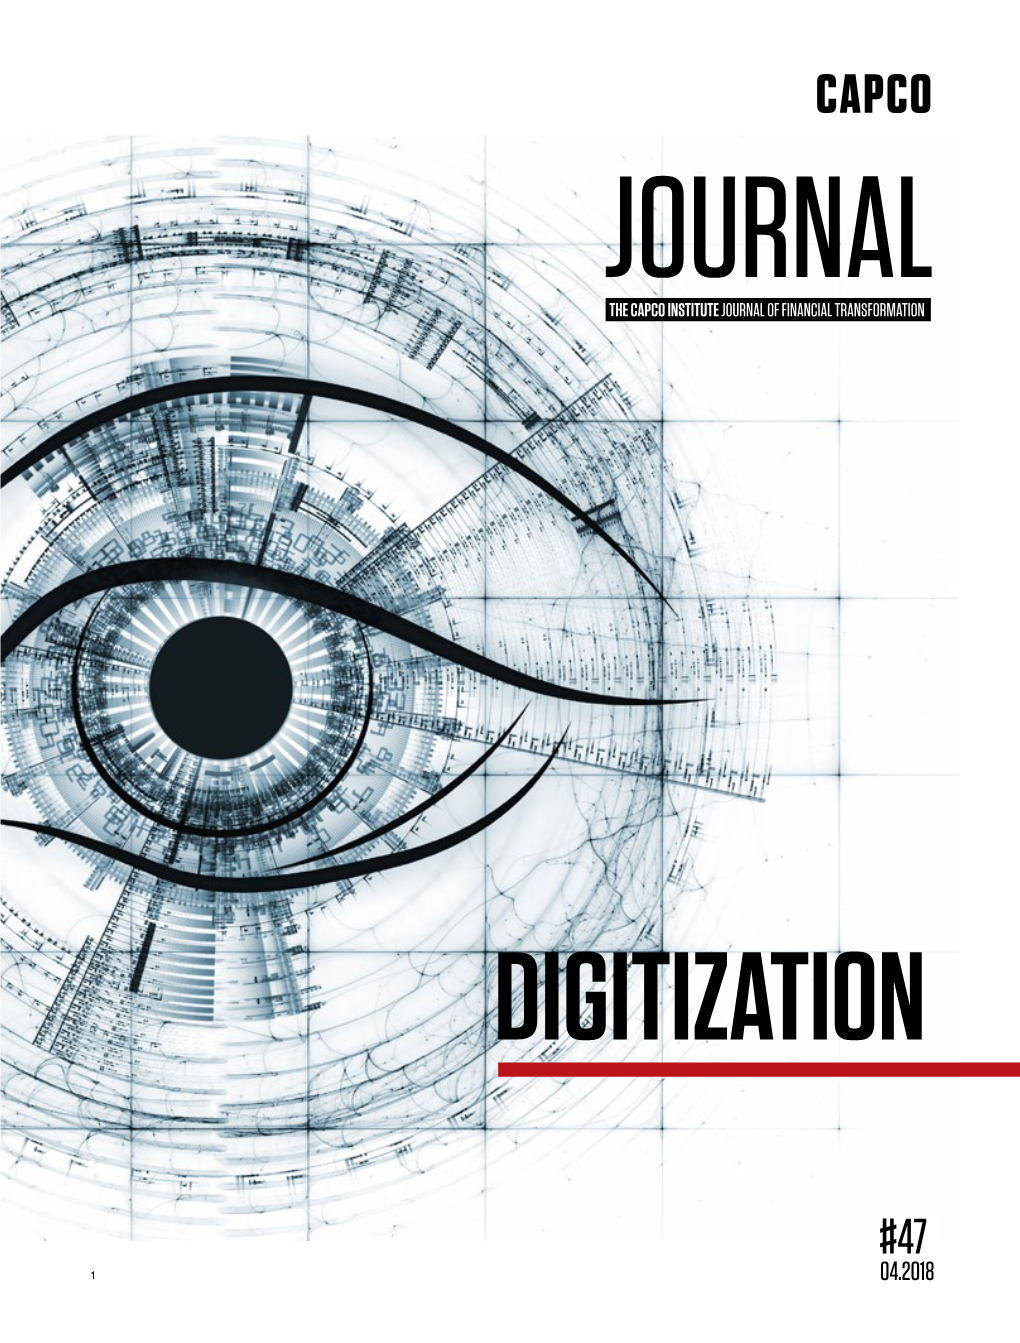 Journal the Capco Institute Journal of Financial Transformation